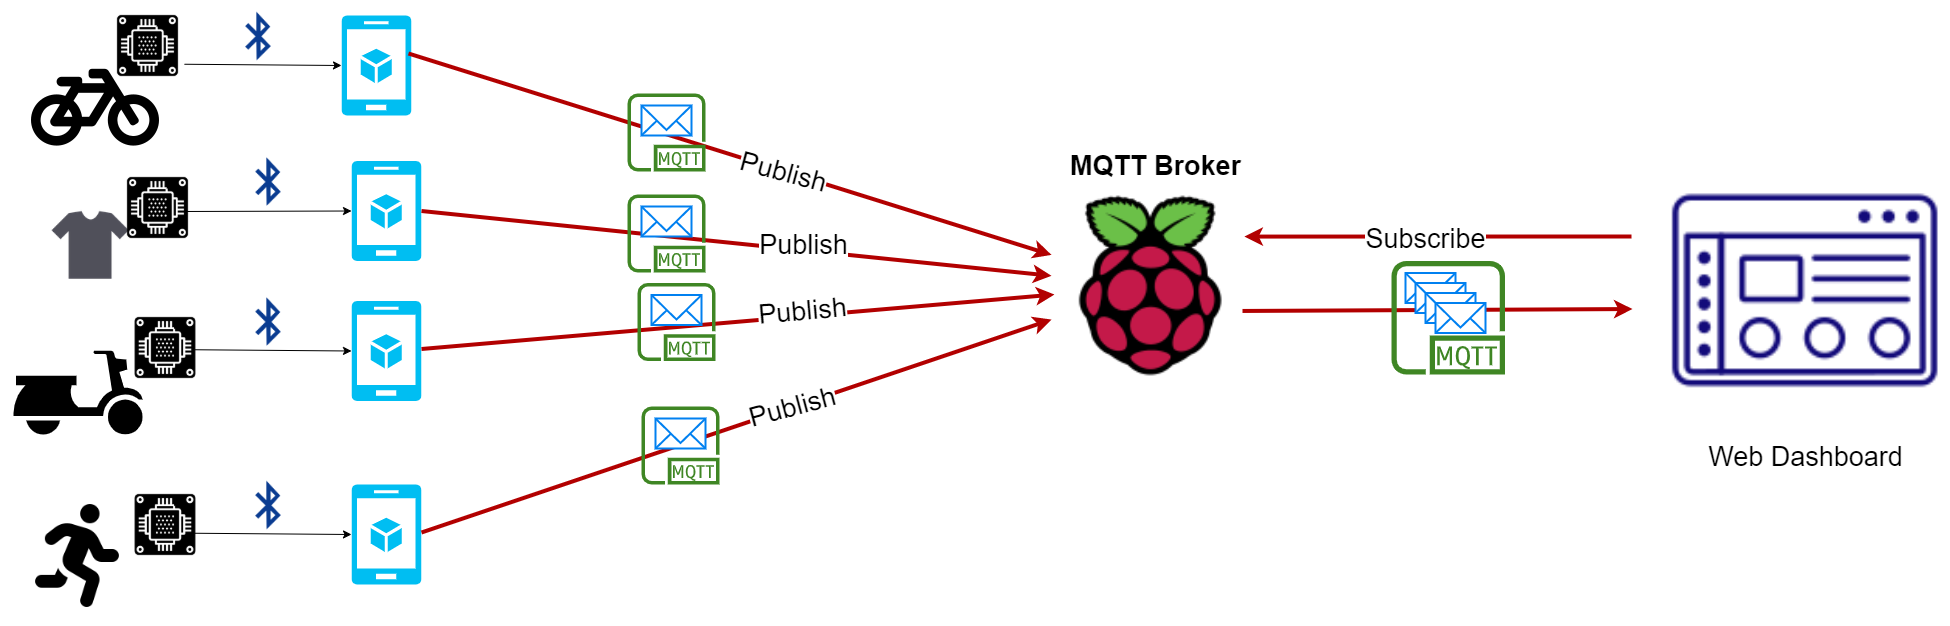 Theengs Gateway - BLE to MQTT on a Raspberry Pi, Windows PC or